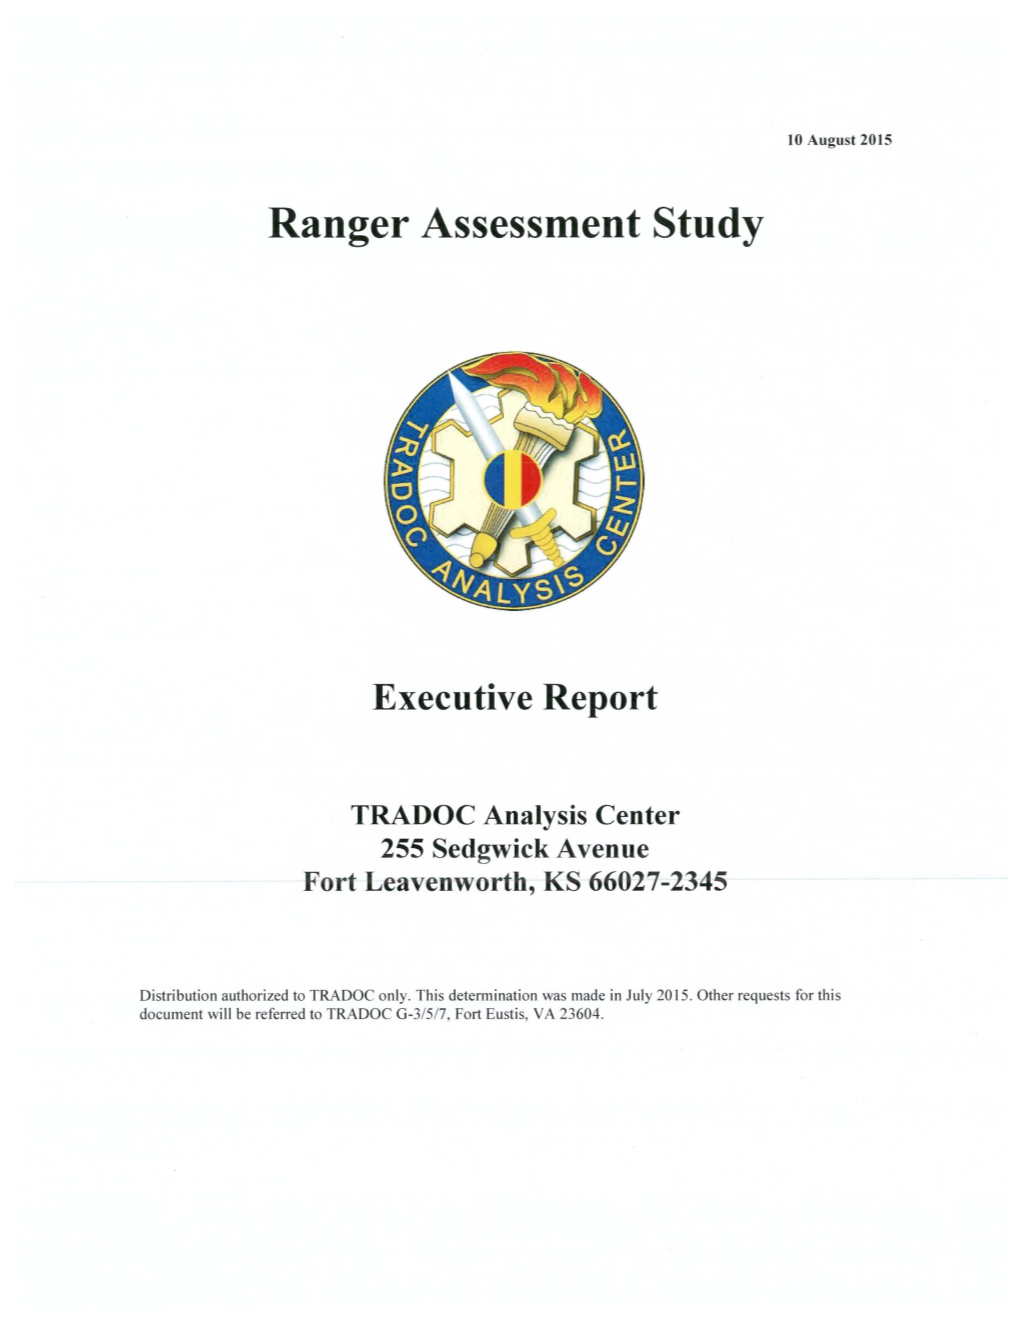 Army Ranger Assessment Study Executive Report